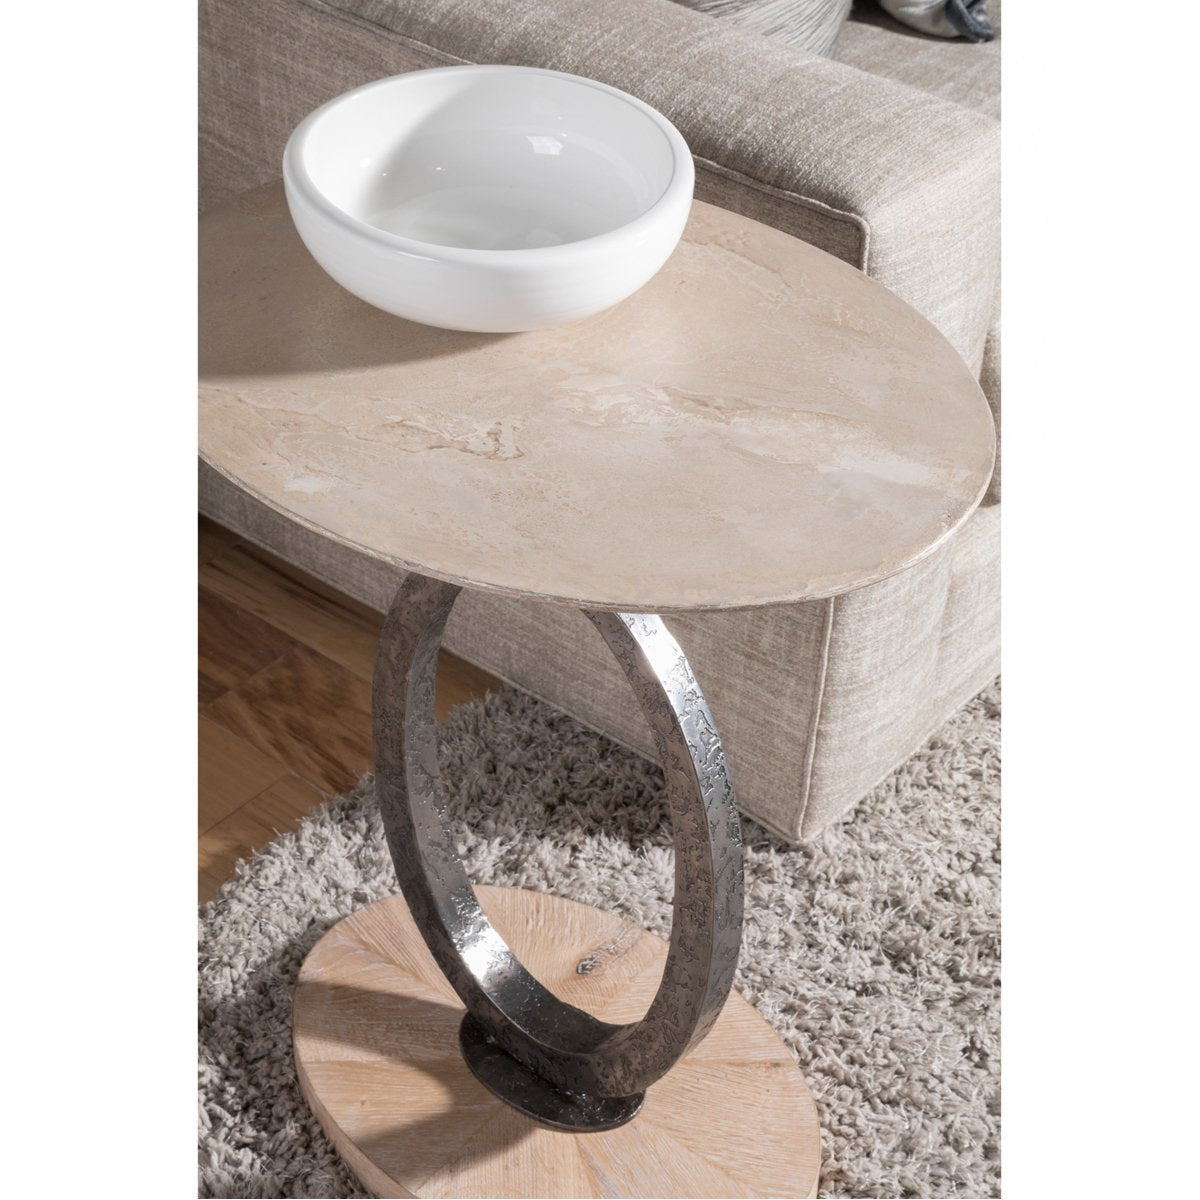 Artistica Home Clement Oval Spot Table 01-2179-952